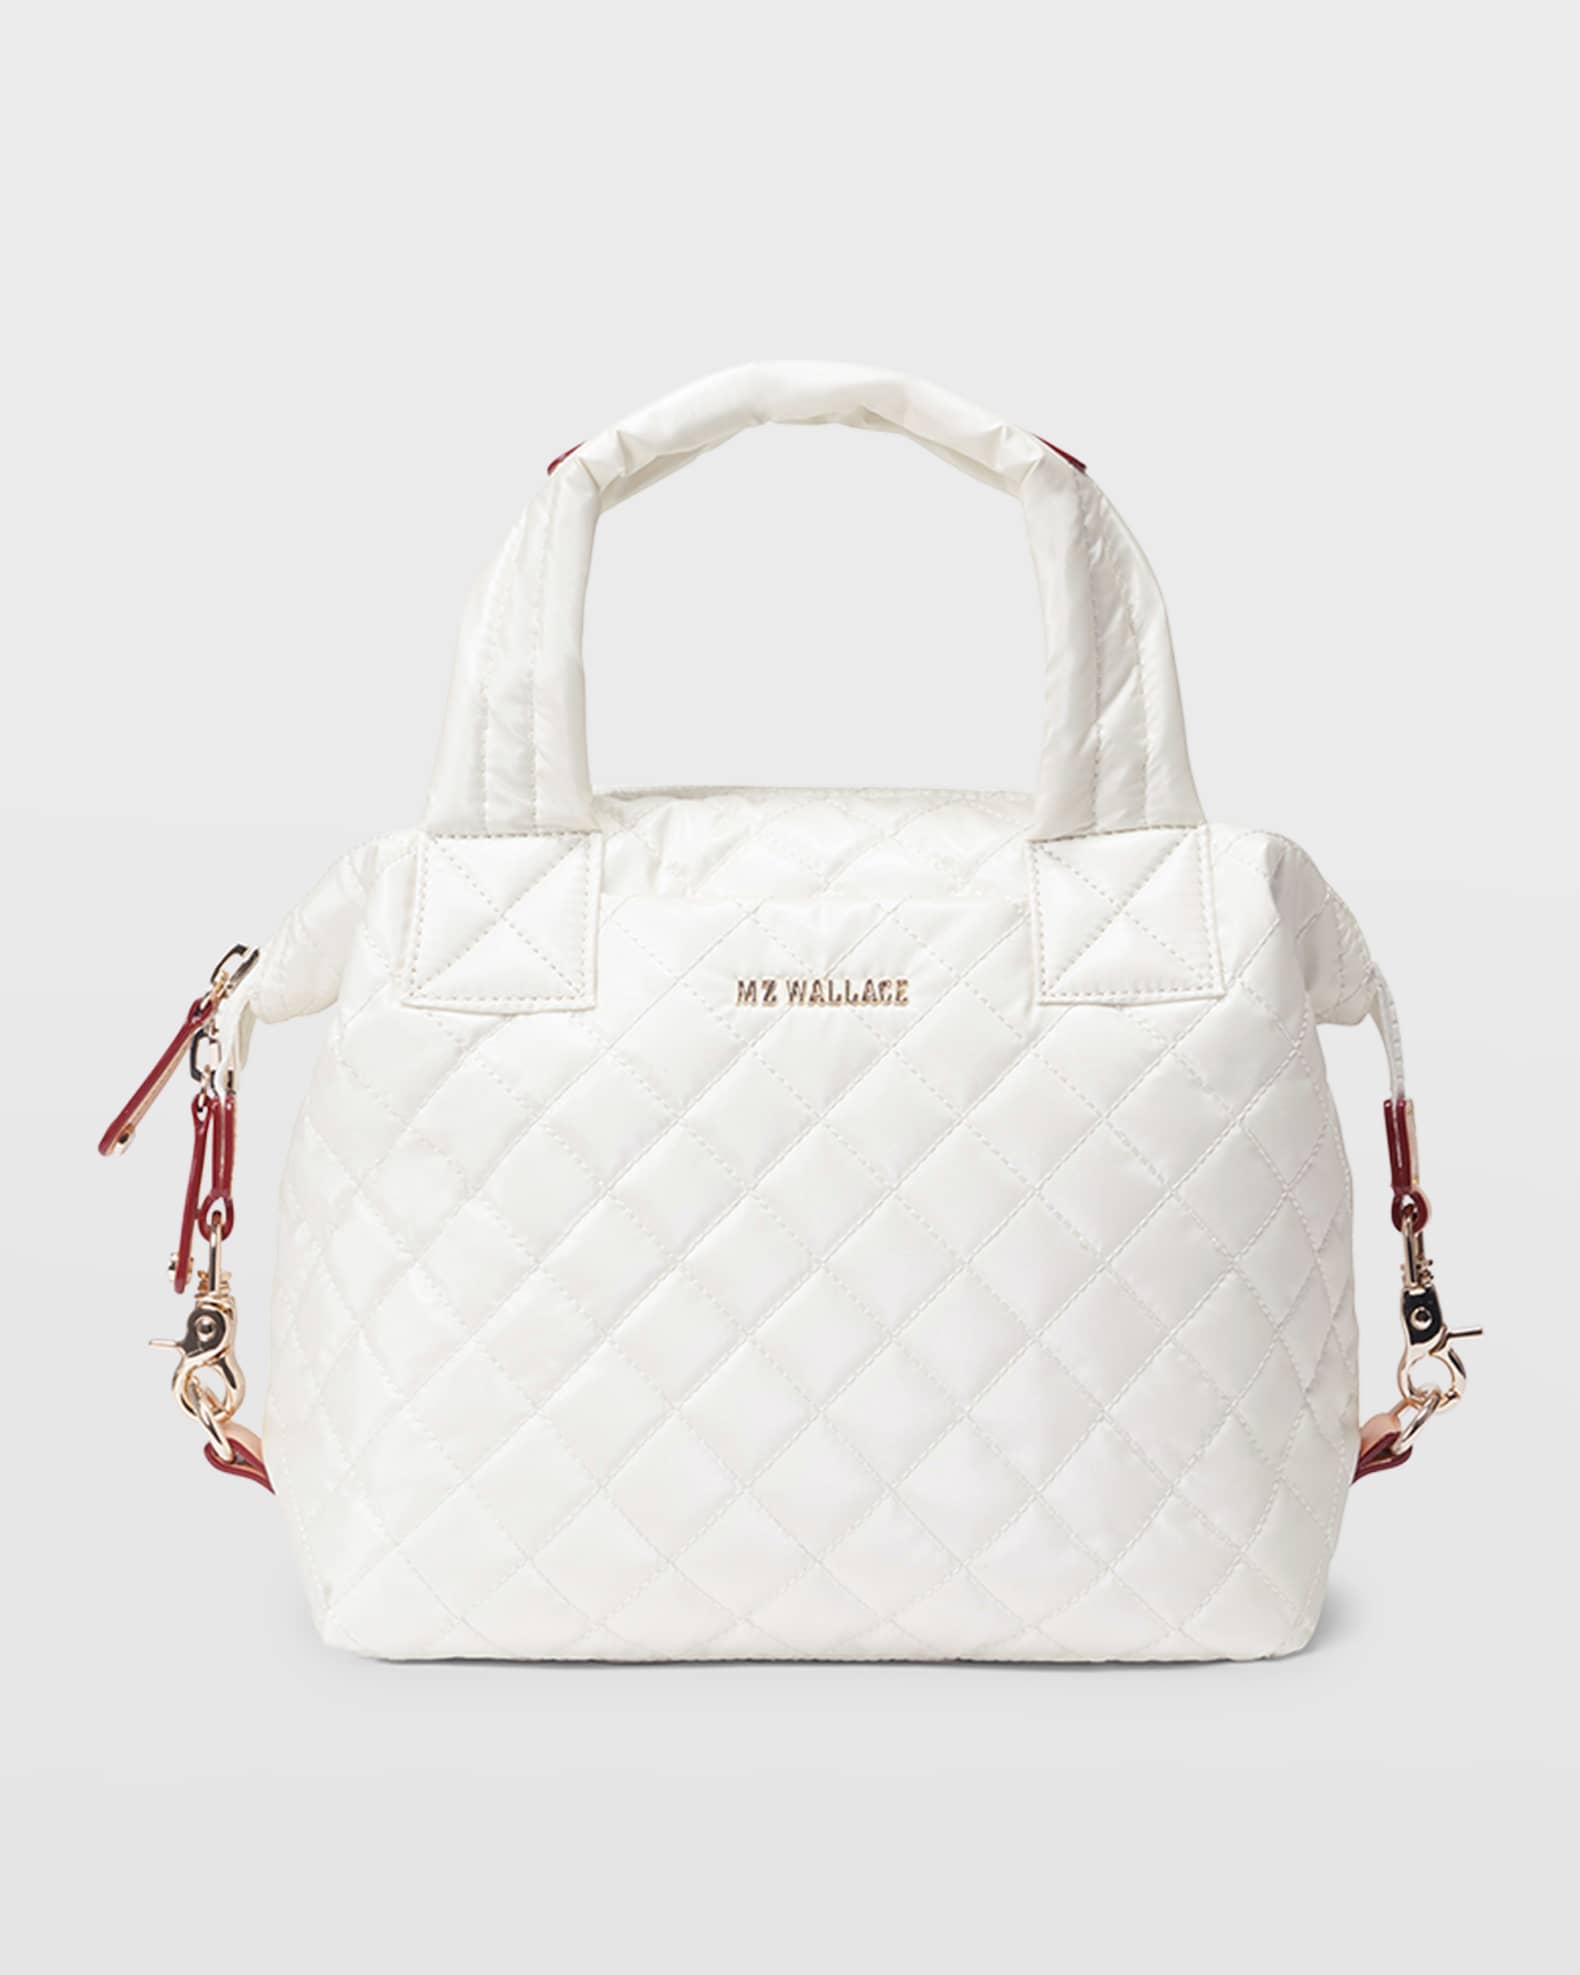 Shop MZ Wallace Sutton bag with exclusive 40% off discount